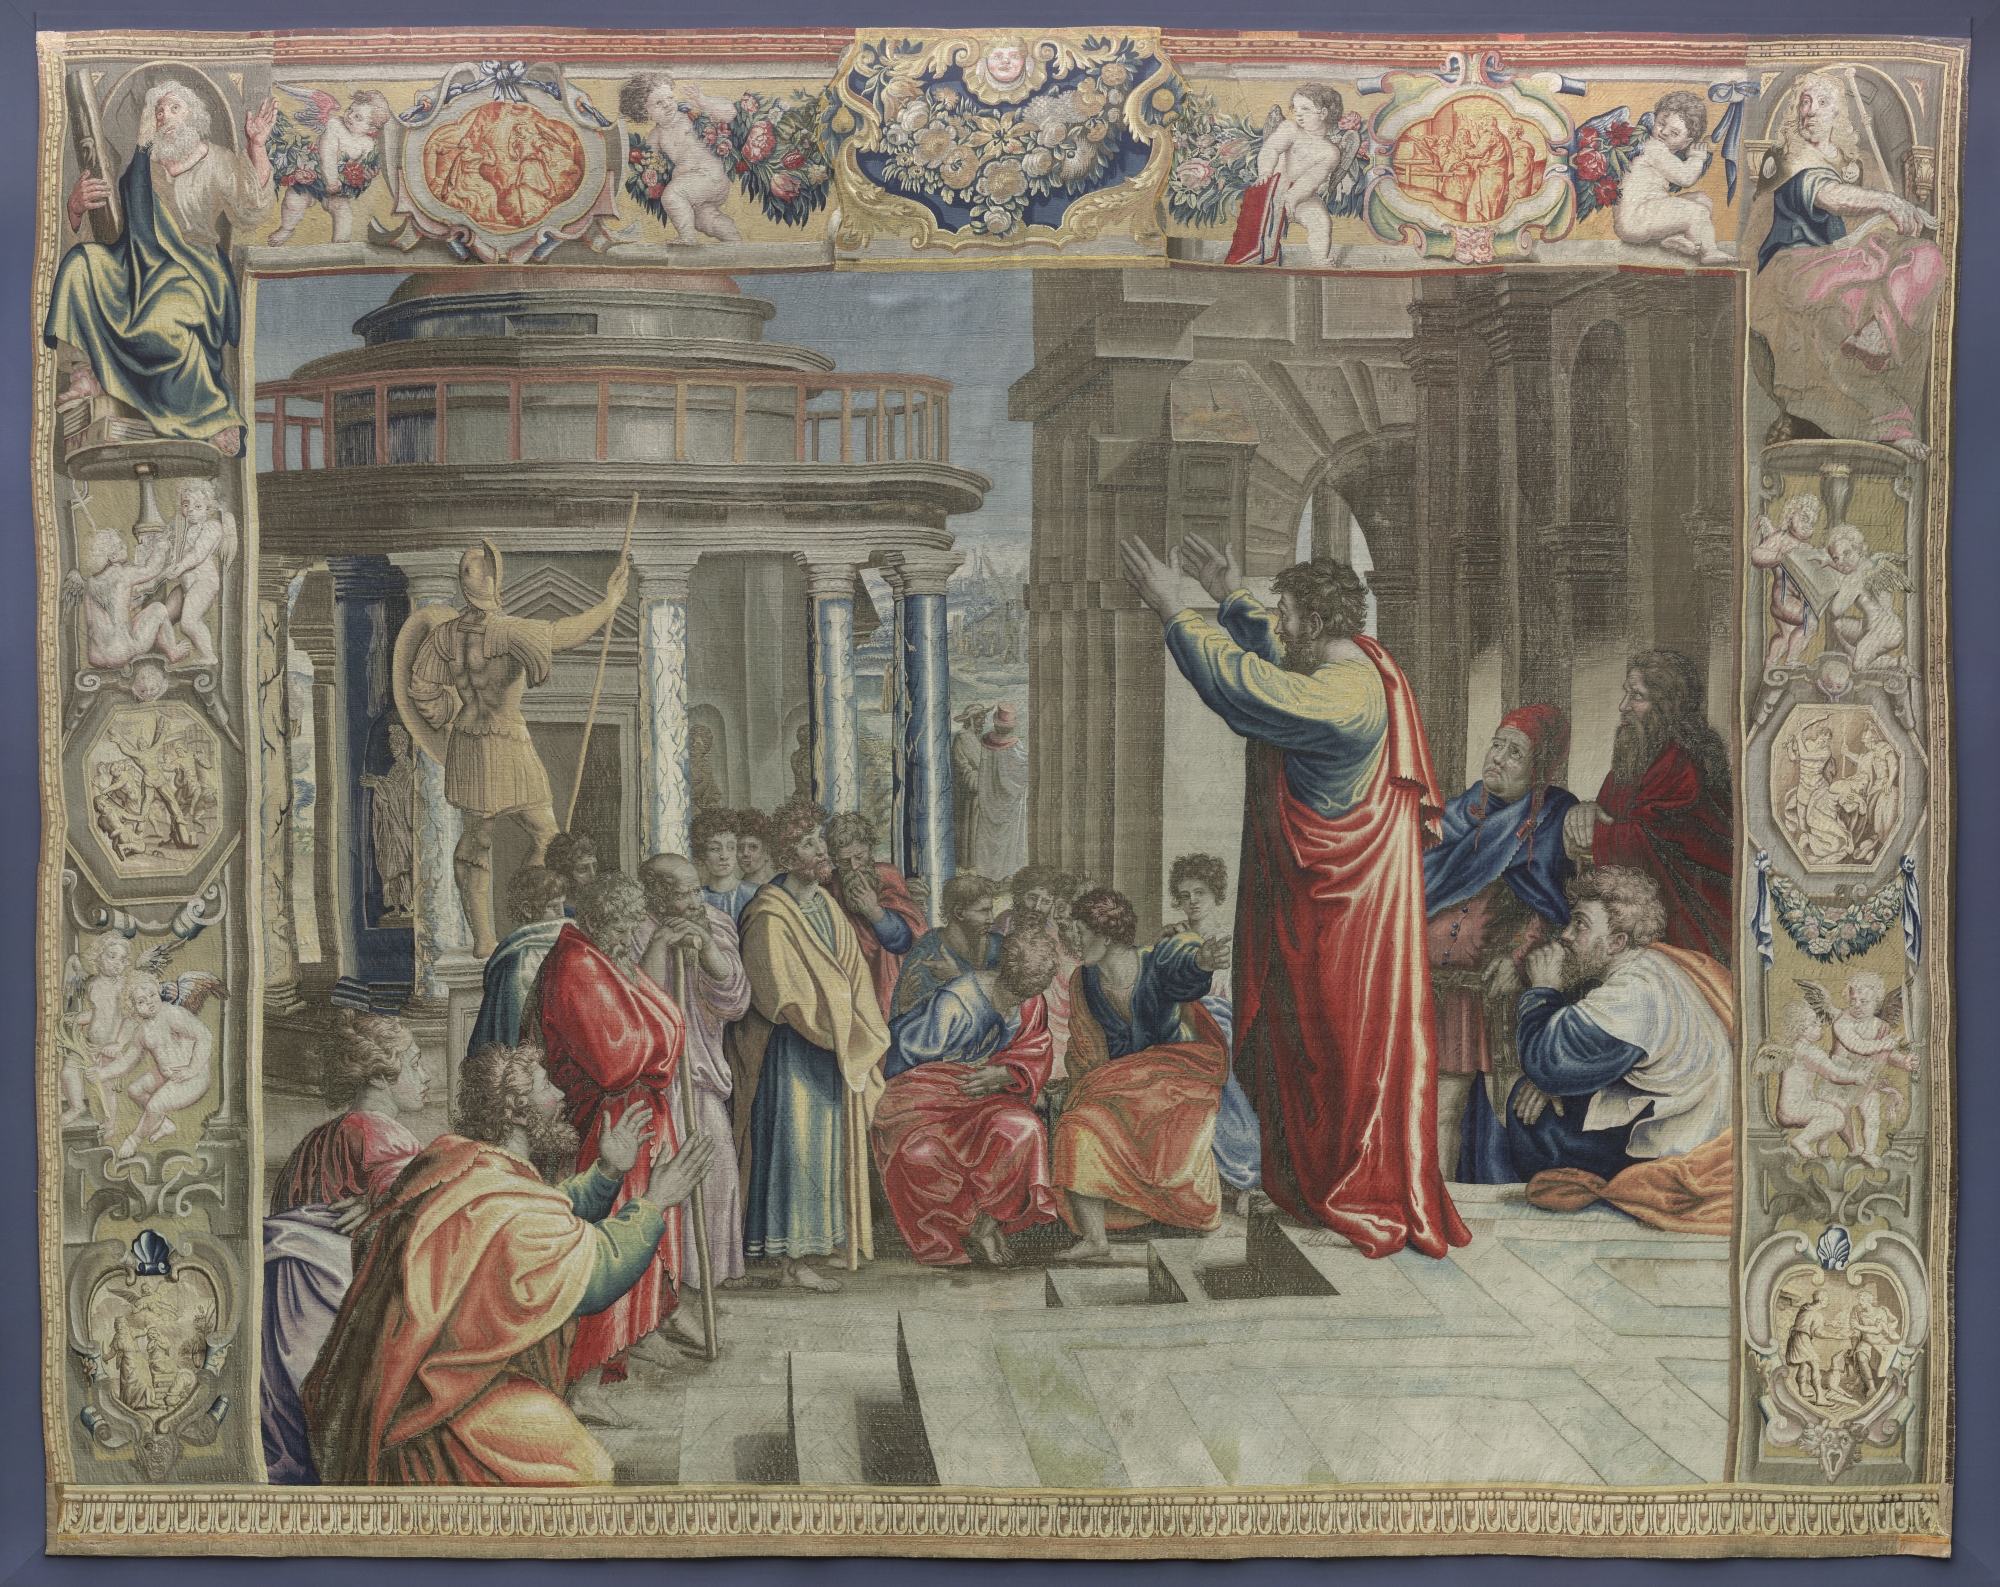 Mortlake manufactory (after designs by Raphael), St. Paul Preaching at Athens, After 1625. Tapestry. Staatliche Kunstsammlungen Dresden, Gemäldegalerie Alte Meister, gal. no. B5